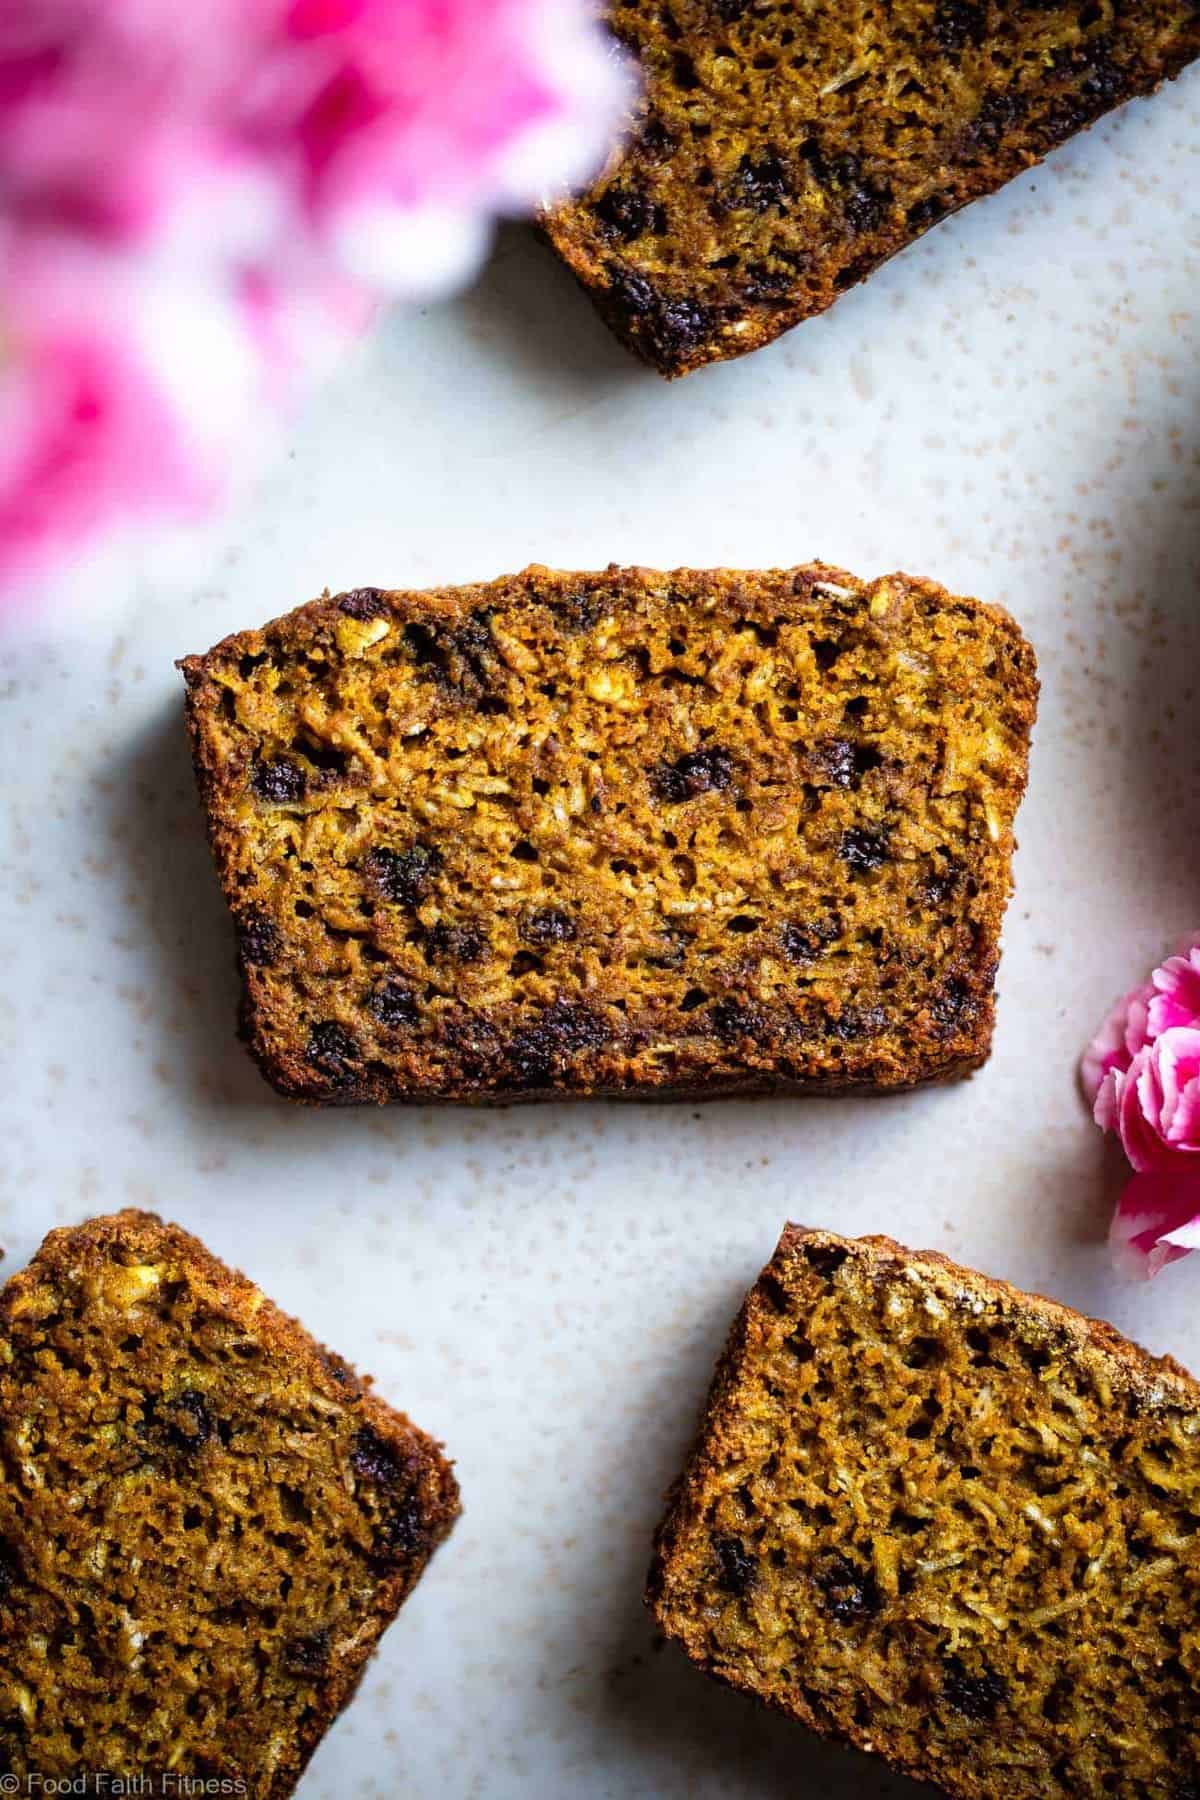 Gluten Free Turmeric Chocolate Chip Bread - This healthy turmeric bread is spicy-sweet and has melty chocolate chips! A gluten free and dairy free breakfast or snack that is anti-inflammatory! | #Foodfaithfitness | 